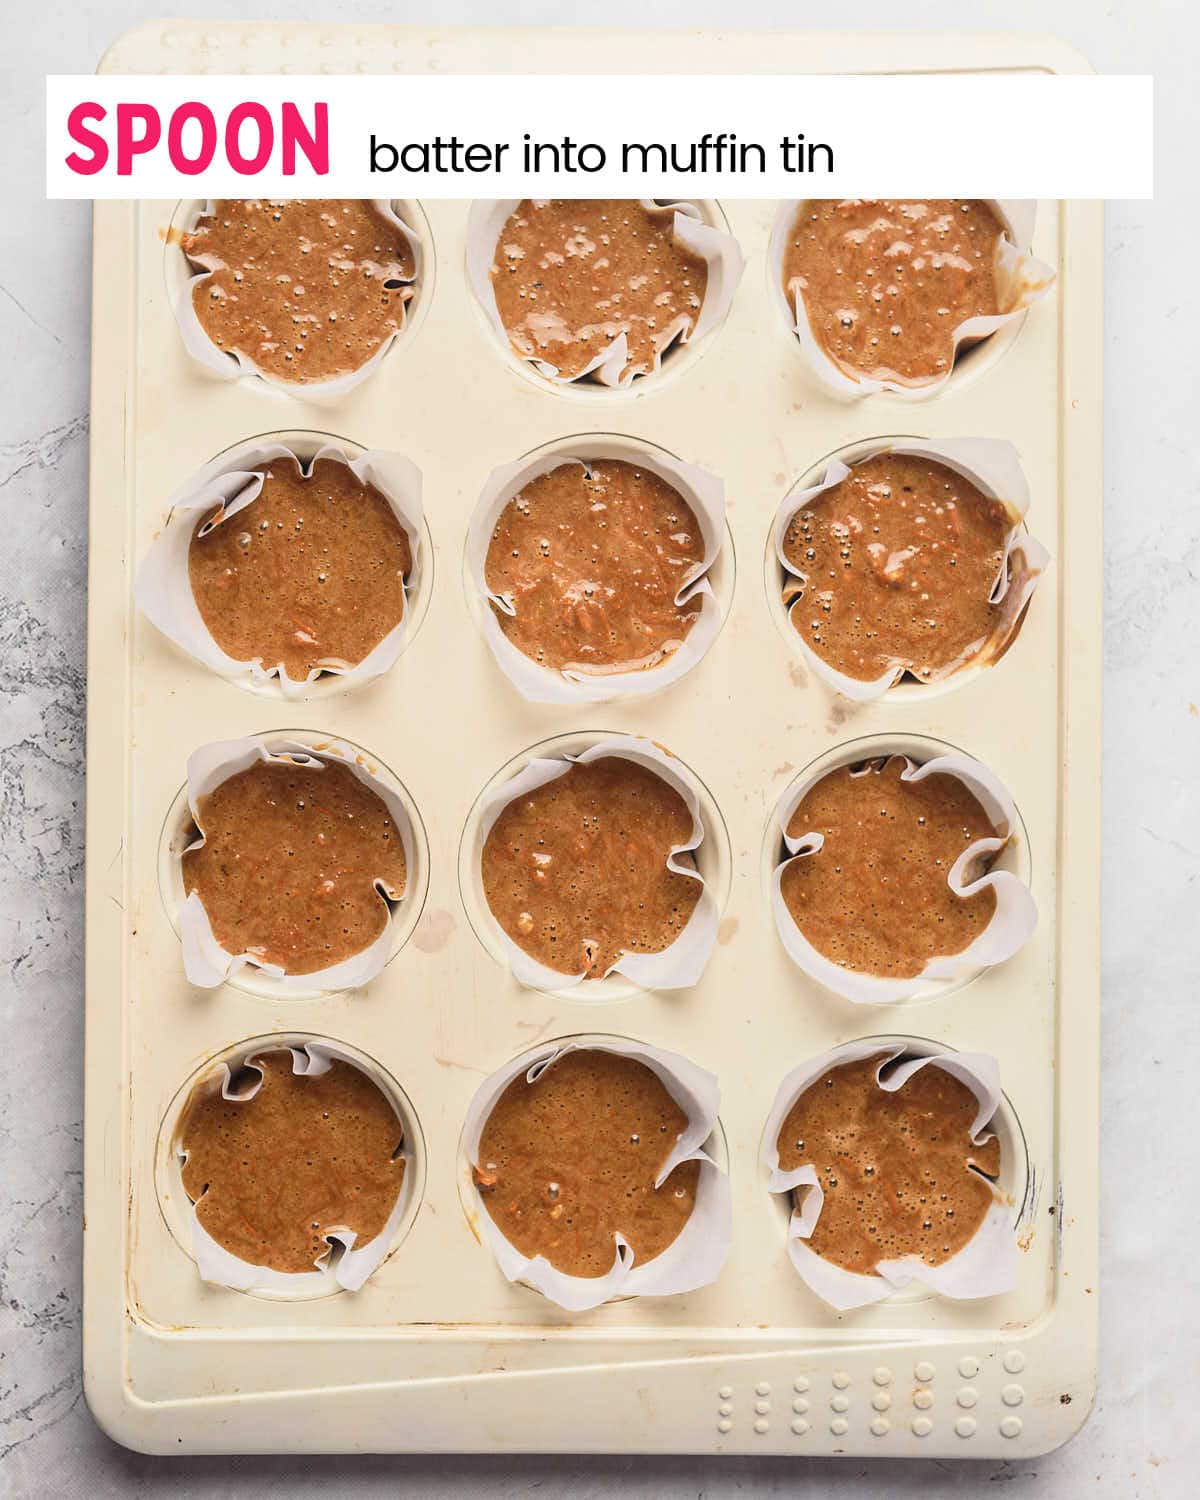 Process Step: Pour batter into muffin tins.